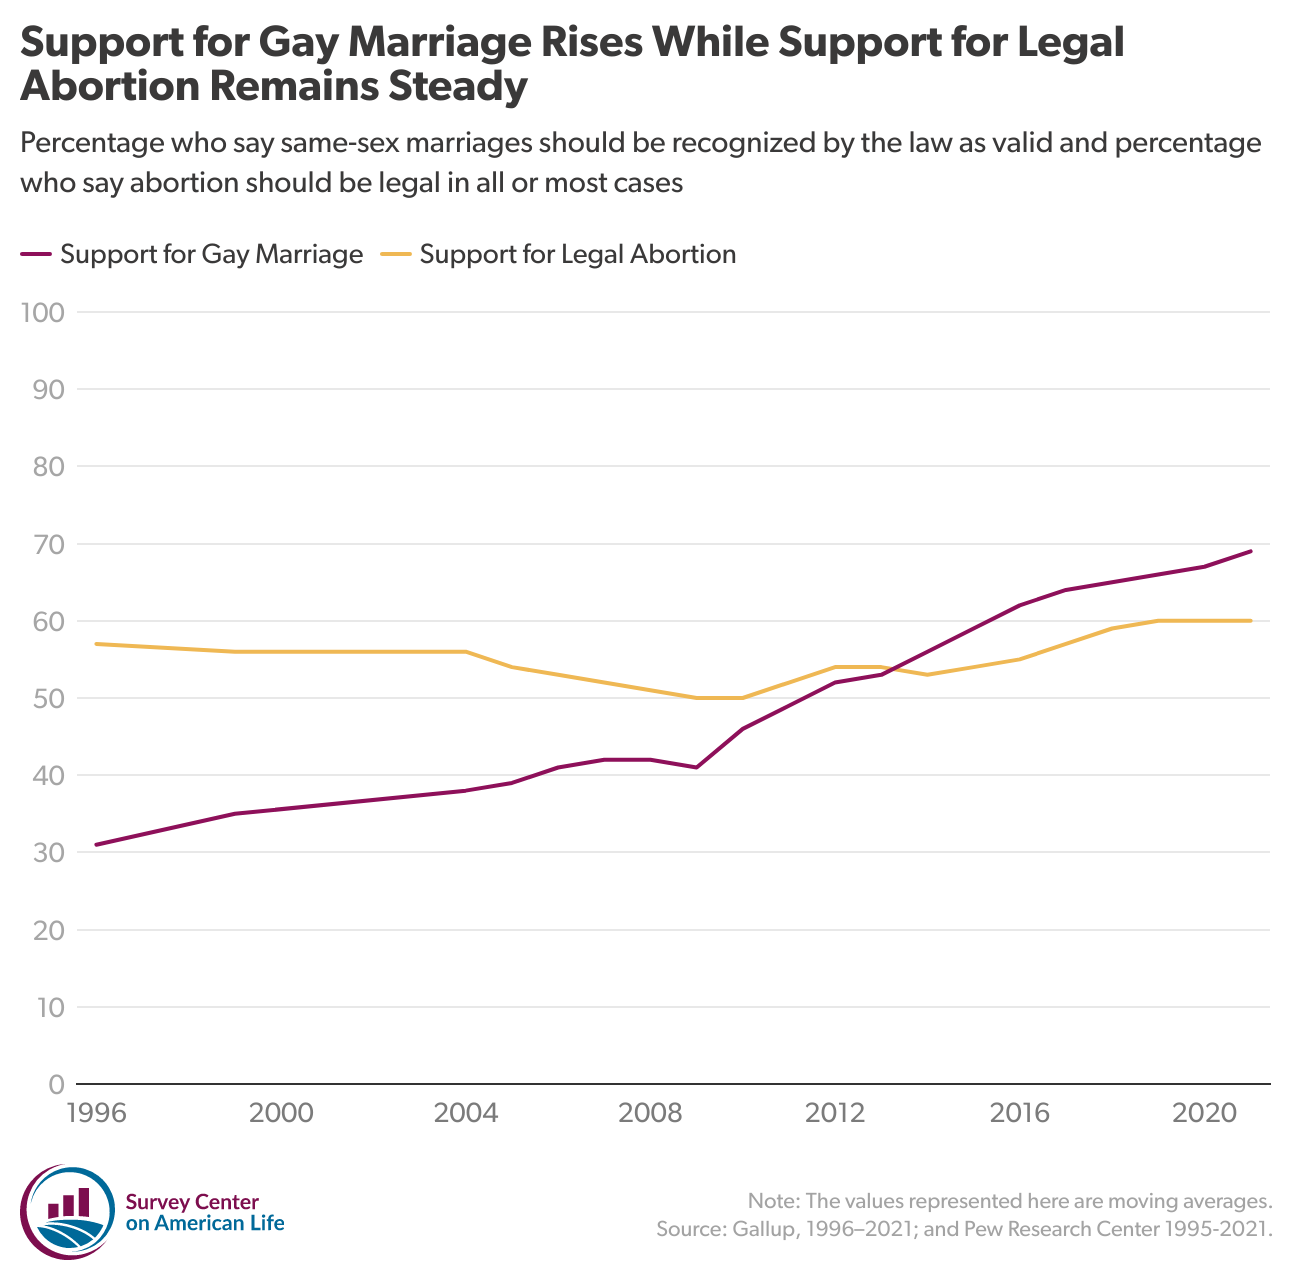 Chart showing the percentage of Americans who say same-sex marriages should be recognized by the law as valid and percentage who say abortion should be legal in all or most cases.